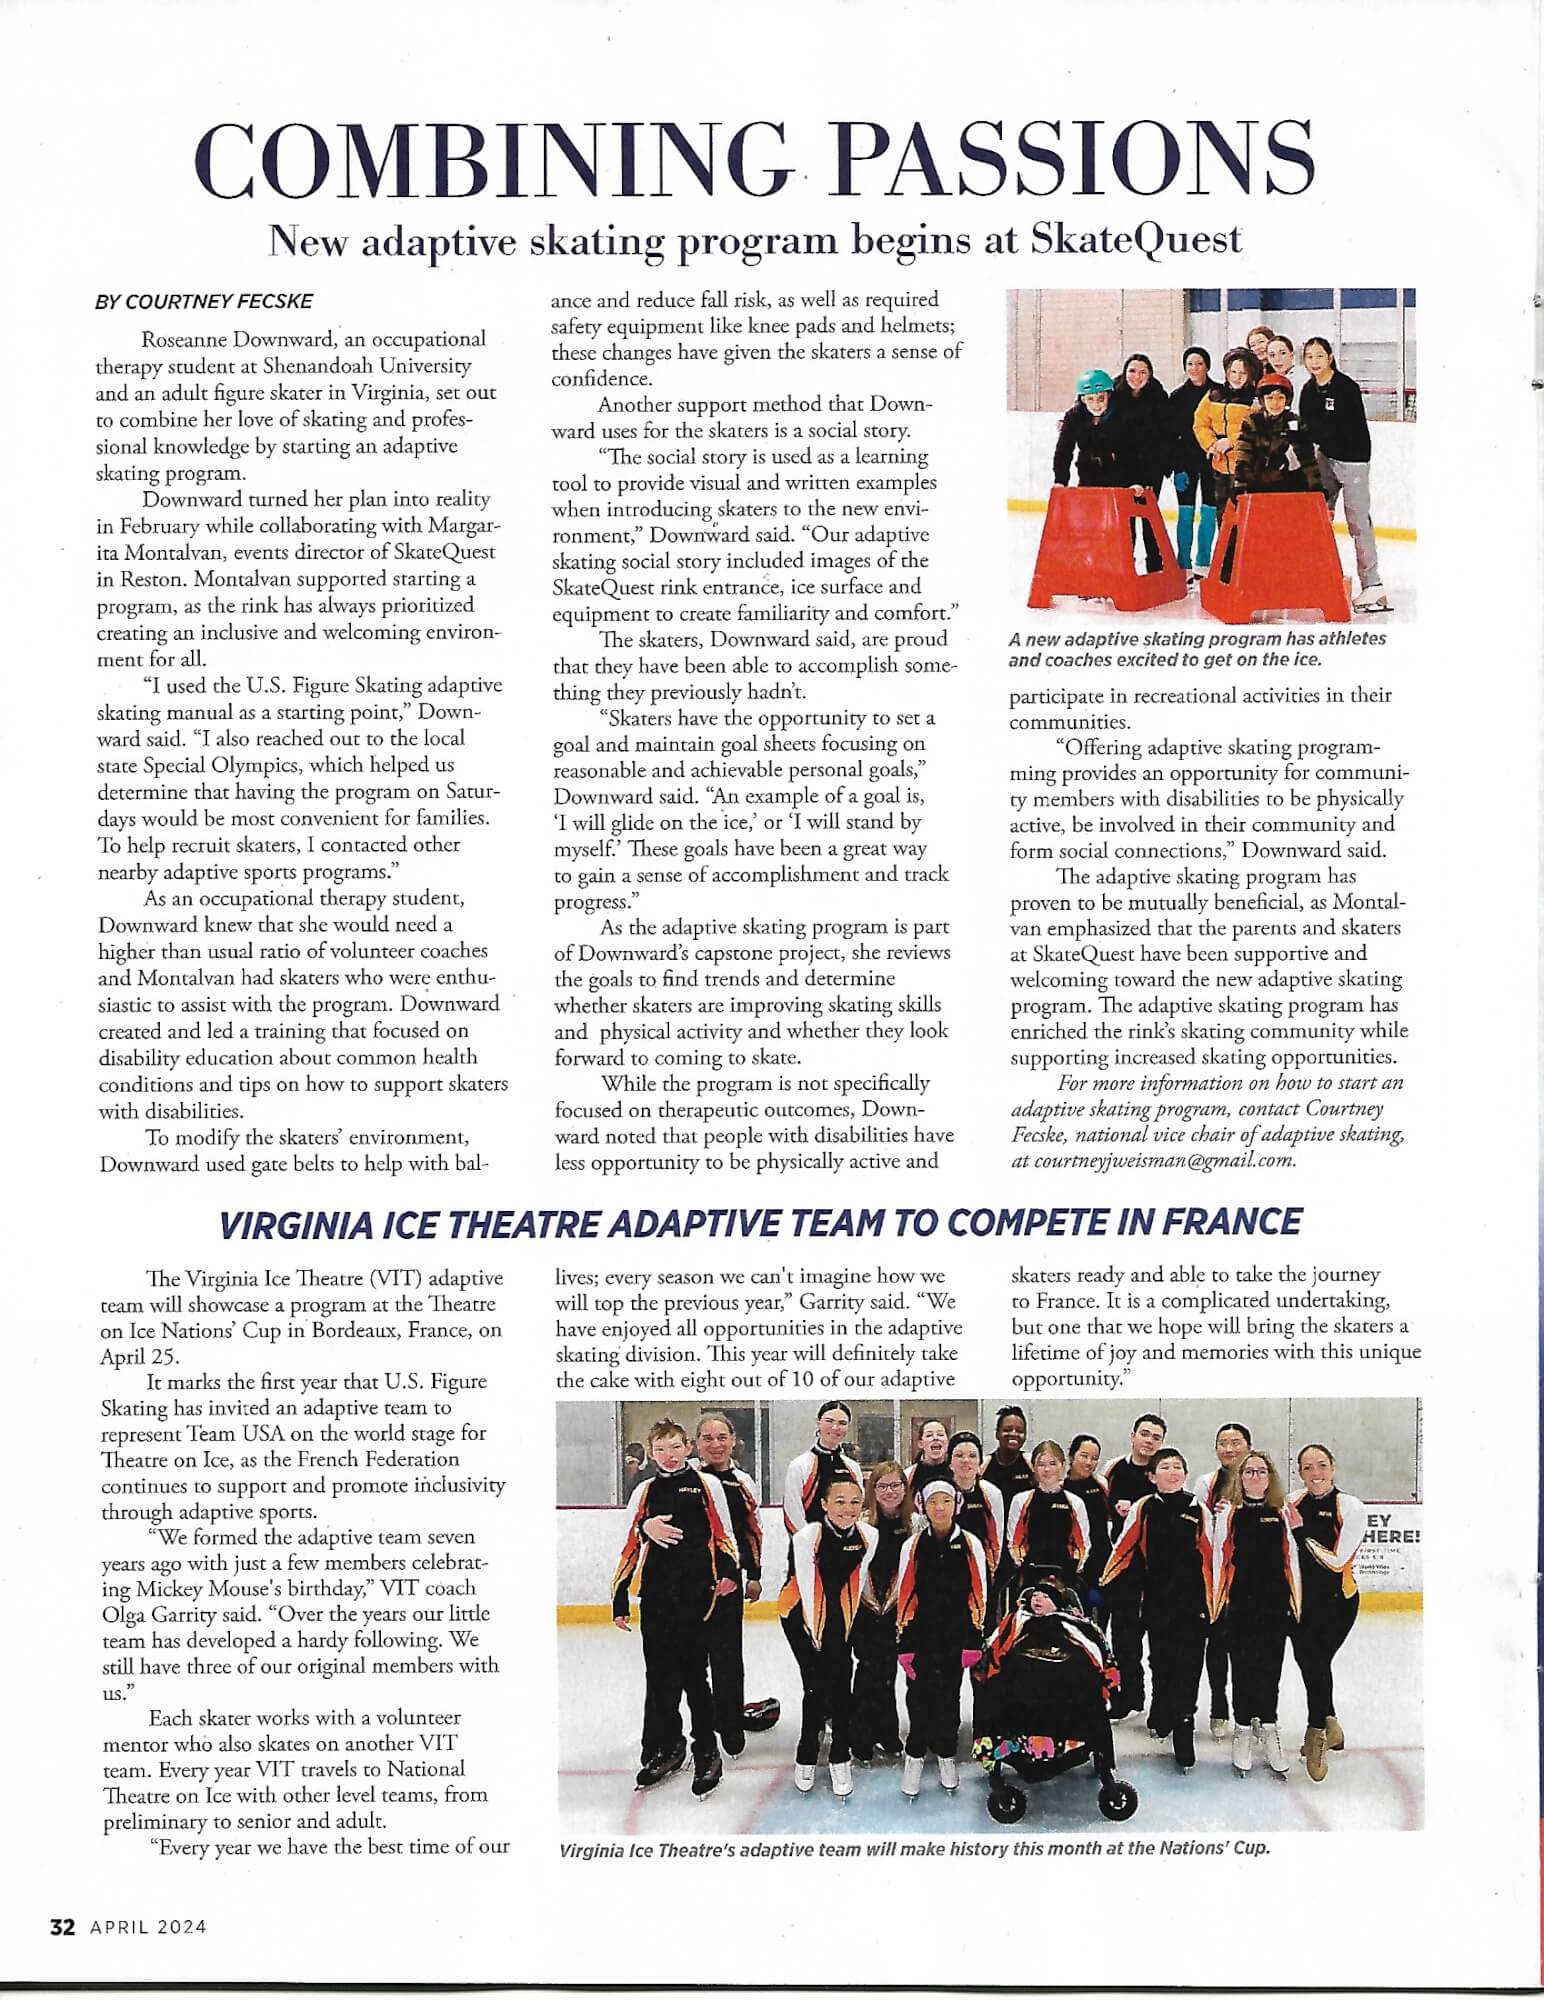 Article about Roseanne Downward's work with adaptive skating published in Skating magazine in 2024. Downward is a Doctor of Occupational Therapy student at Shenandoah University. 